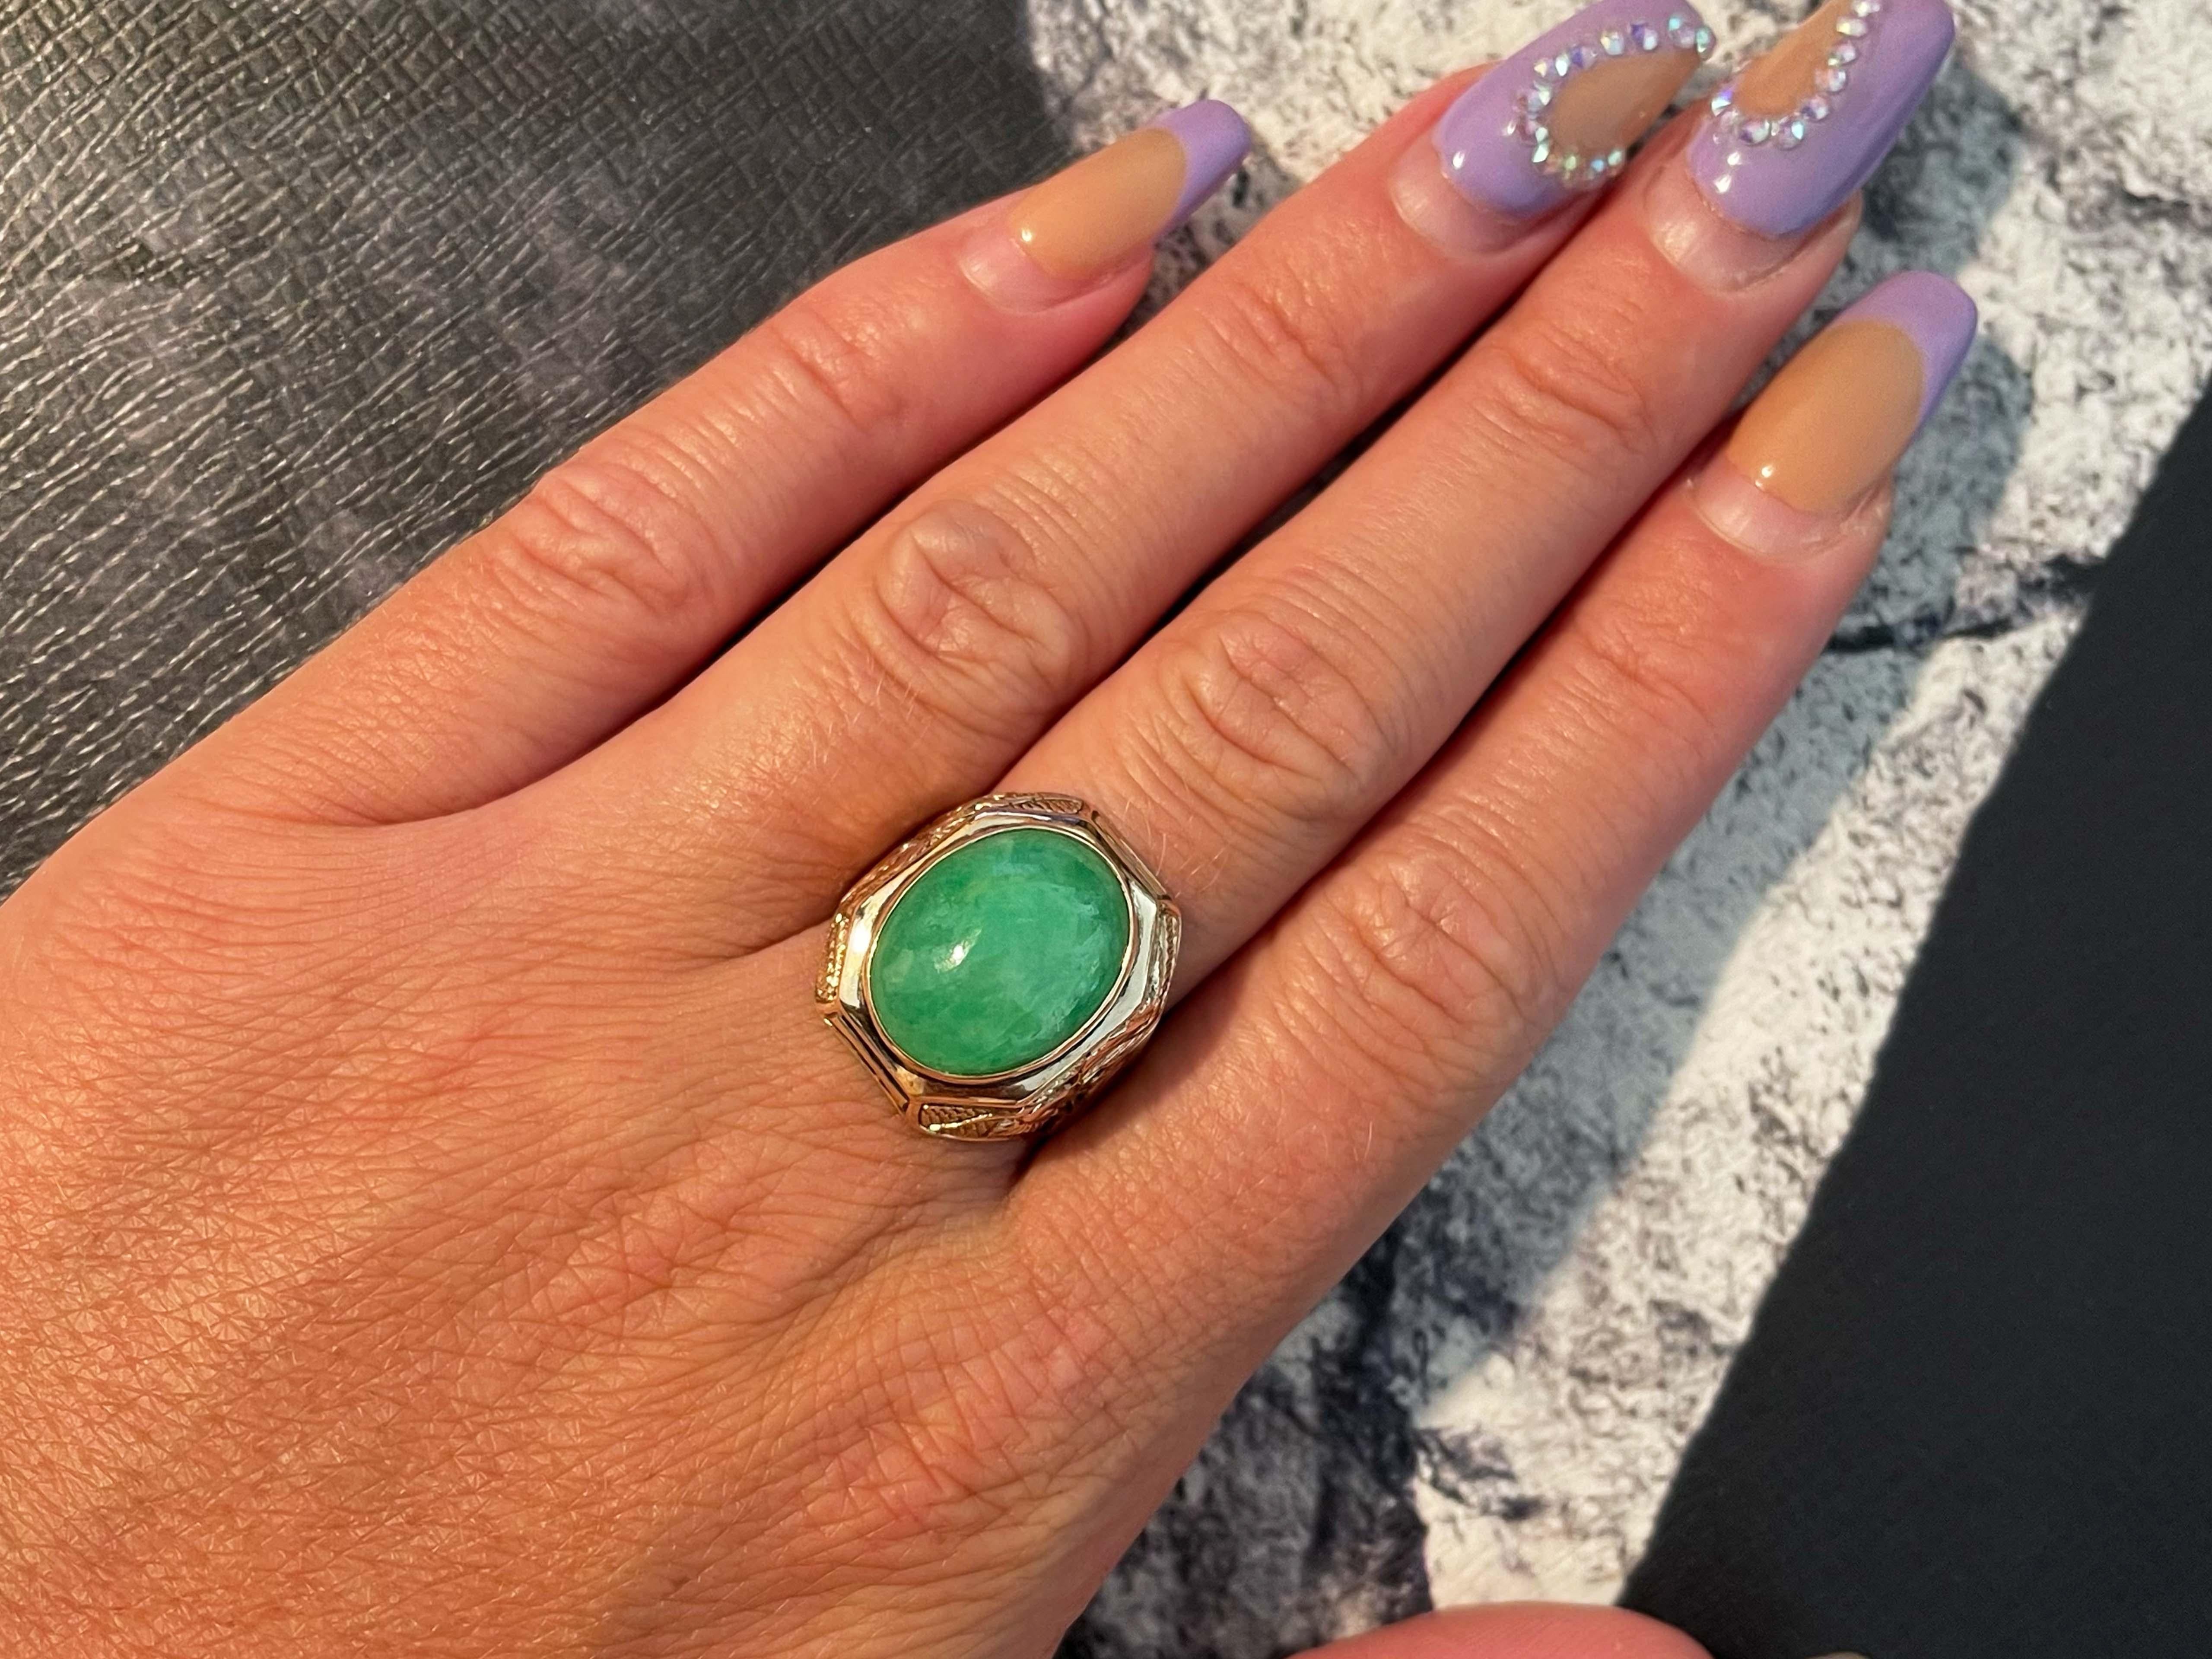 Magnificent vintage oval cabochon green jadeite jade ring in 14k rose gold. The beautiful mottled green Jade is bezel set and measures approximately 16.29 mm x 13.03 mm x 7.28 mm. The ring has a tapered shank with a cut out Dragon design on the